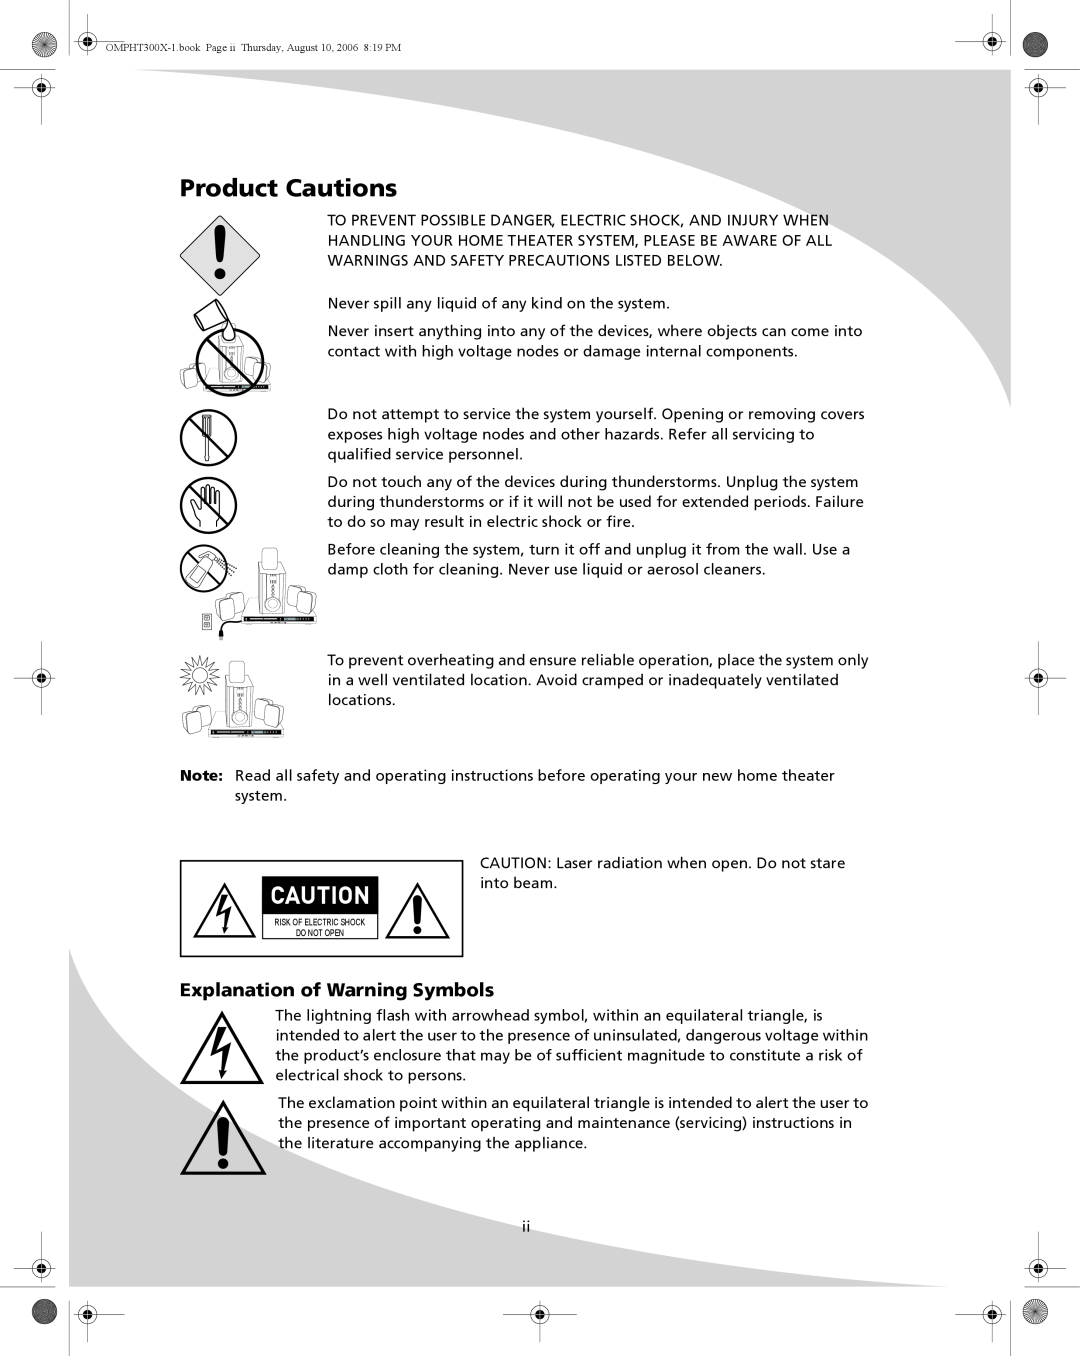 SpectronIQ PHT-300X user manual Product Cautions, Explanation of Warning Symbols 